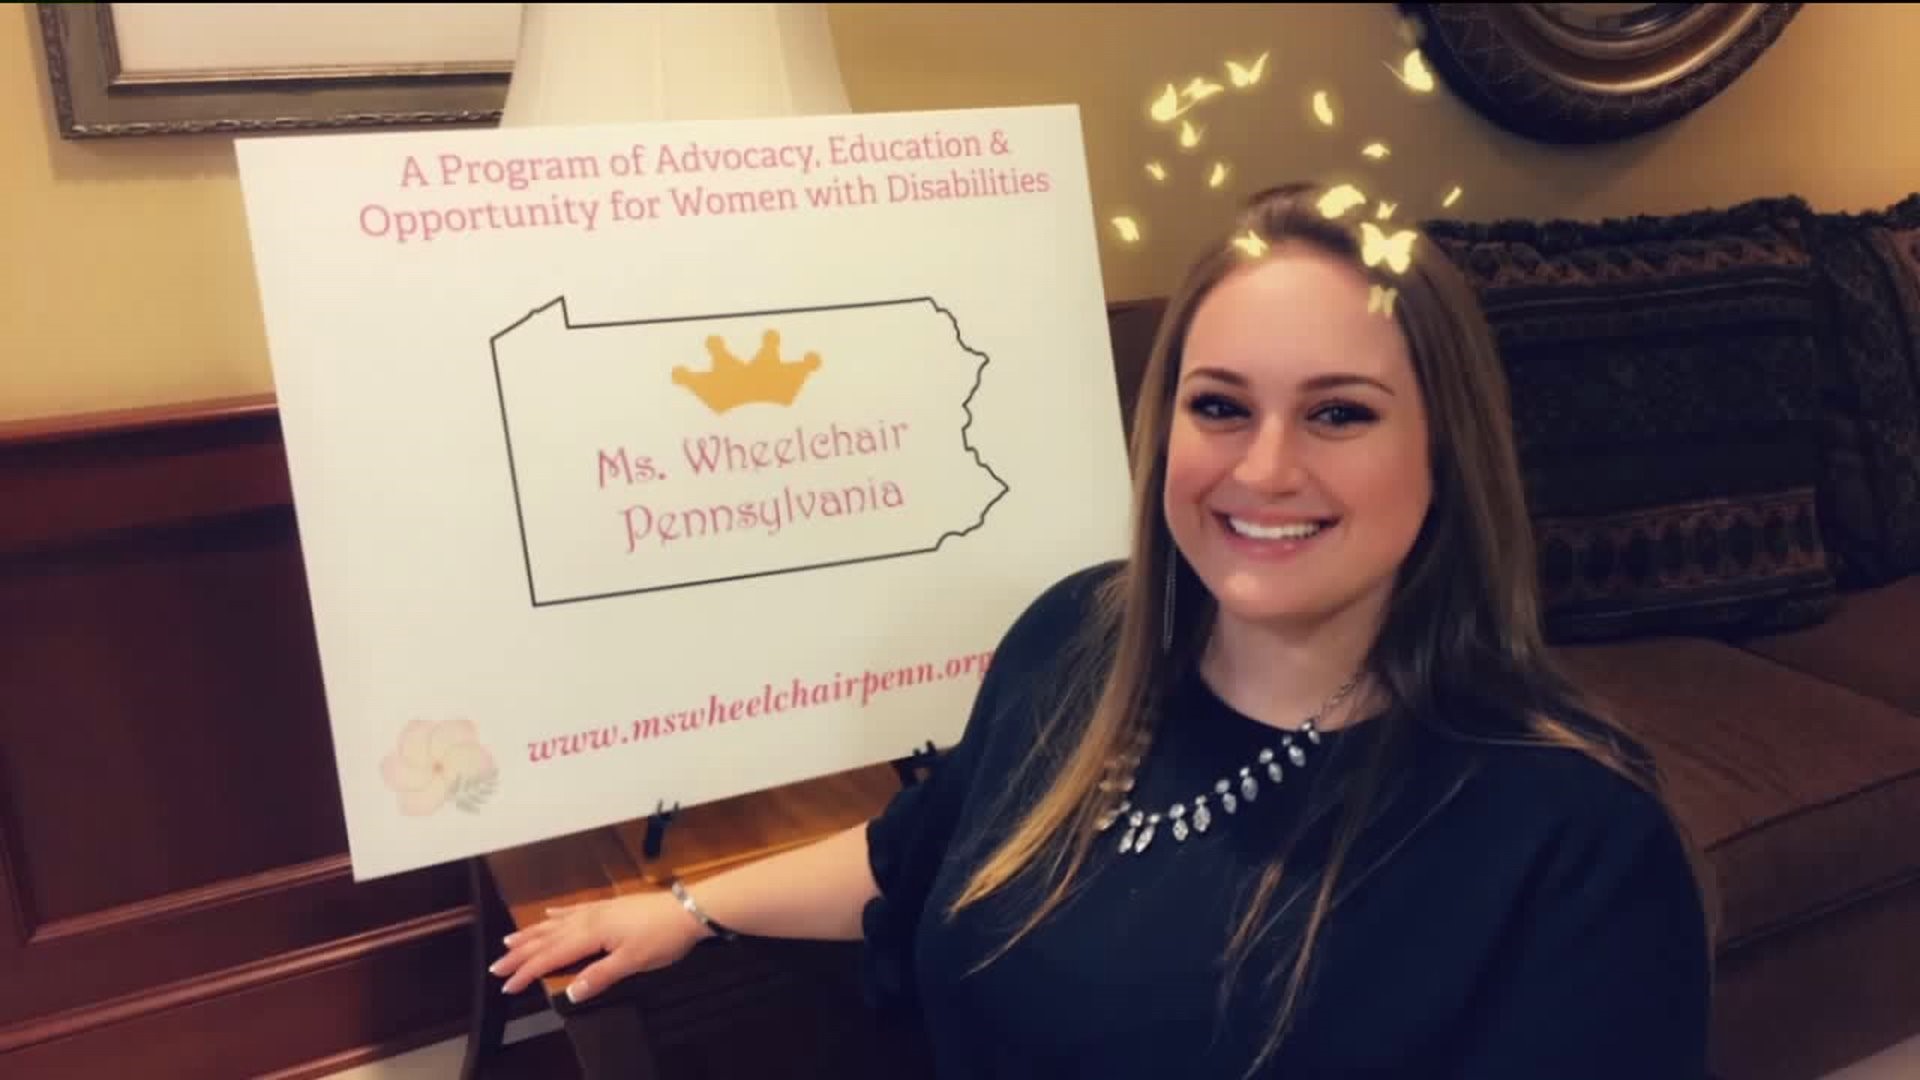 Carbon County Woman Championing Her Cause with a Crown